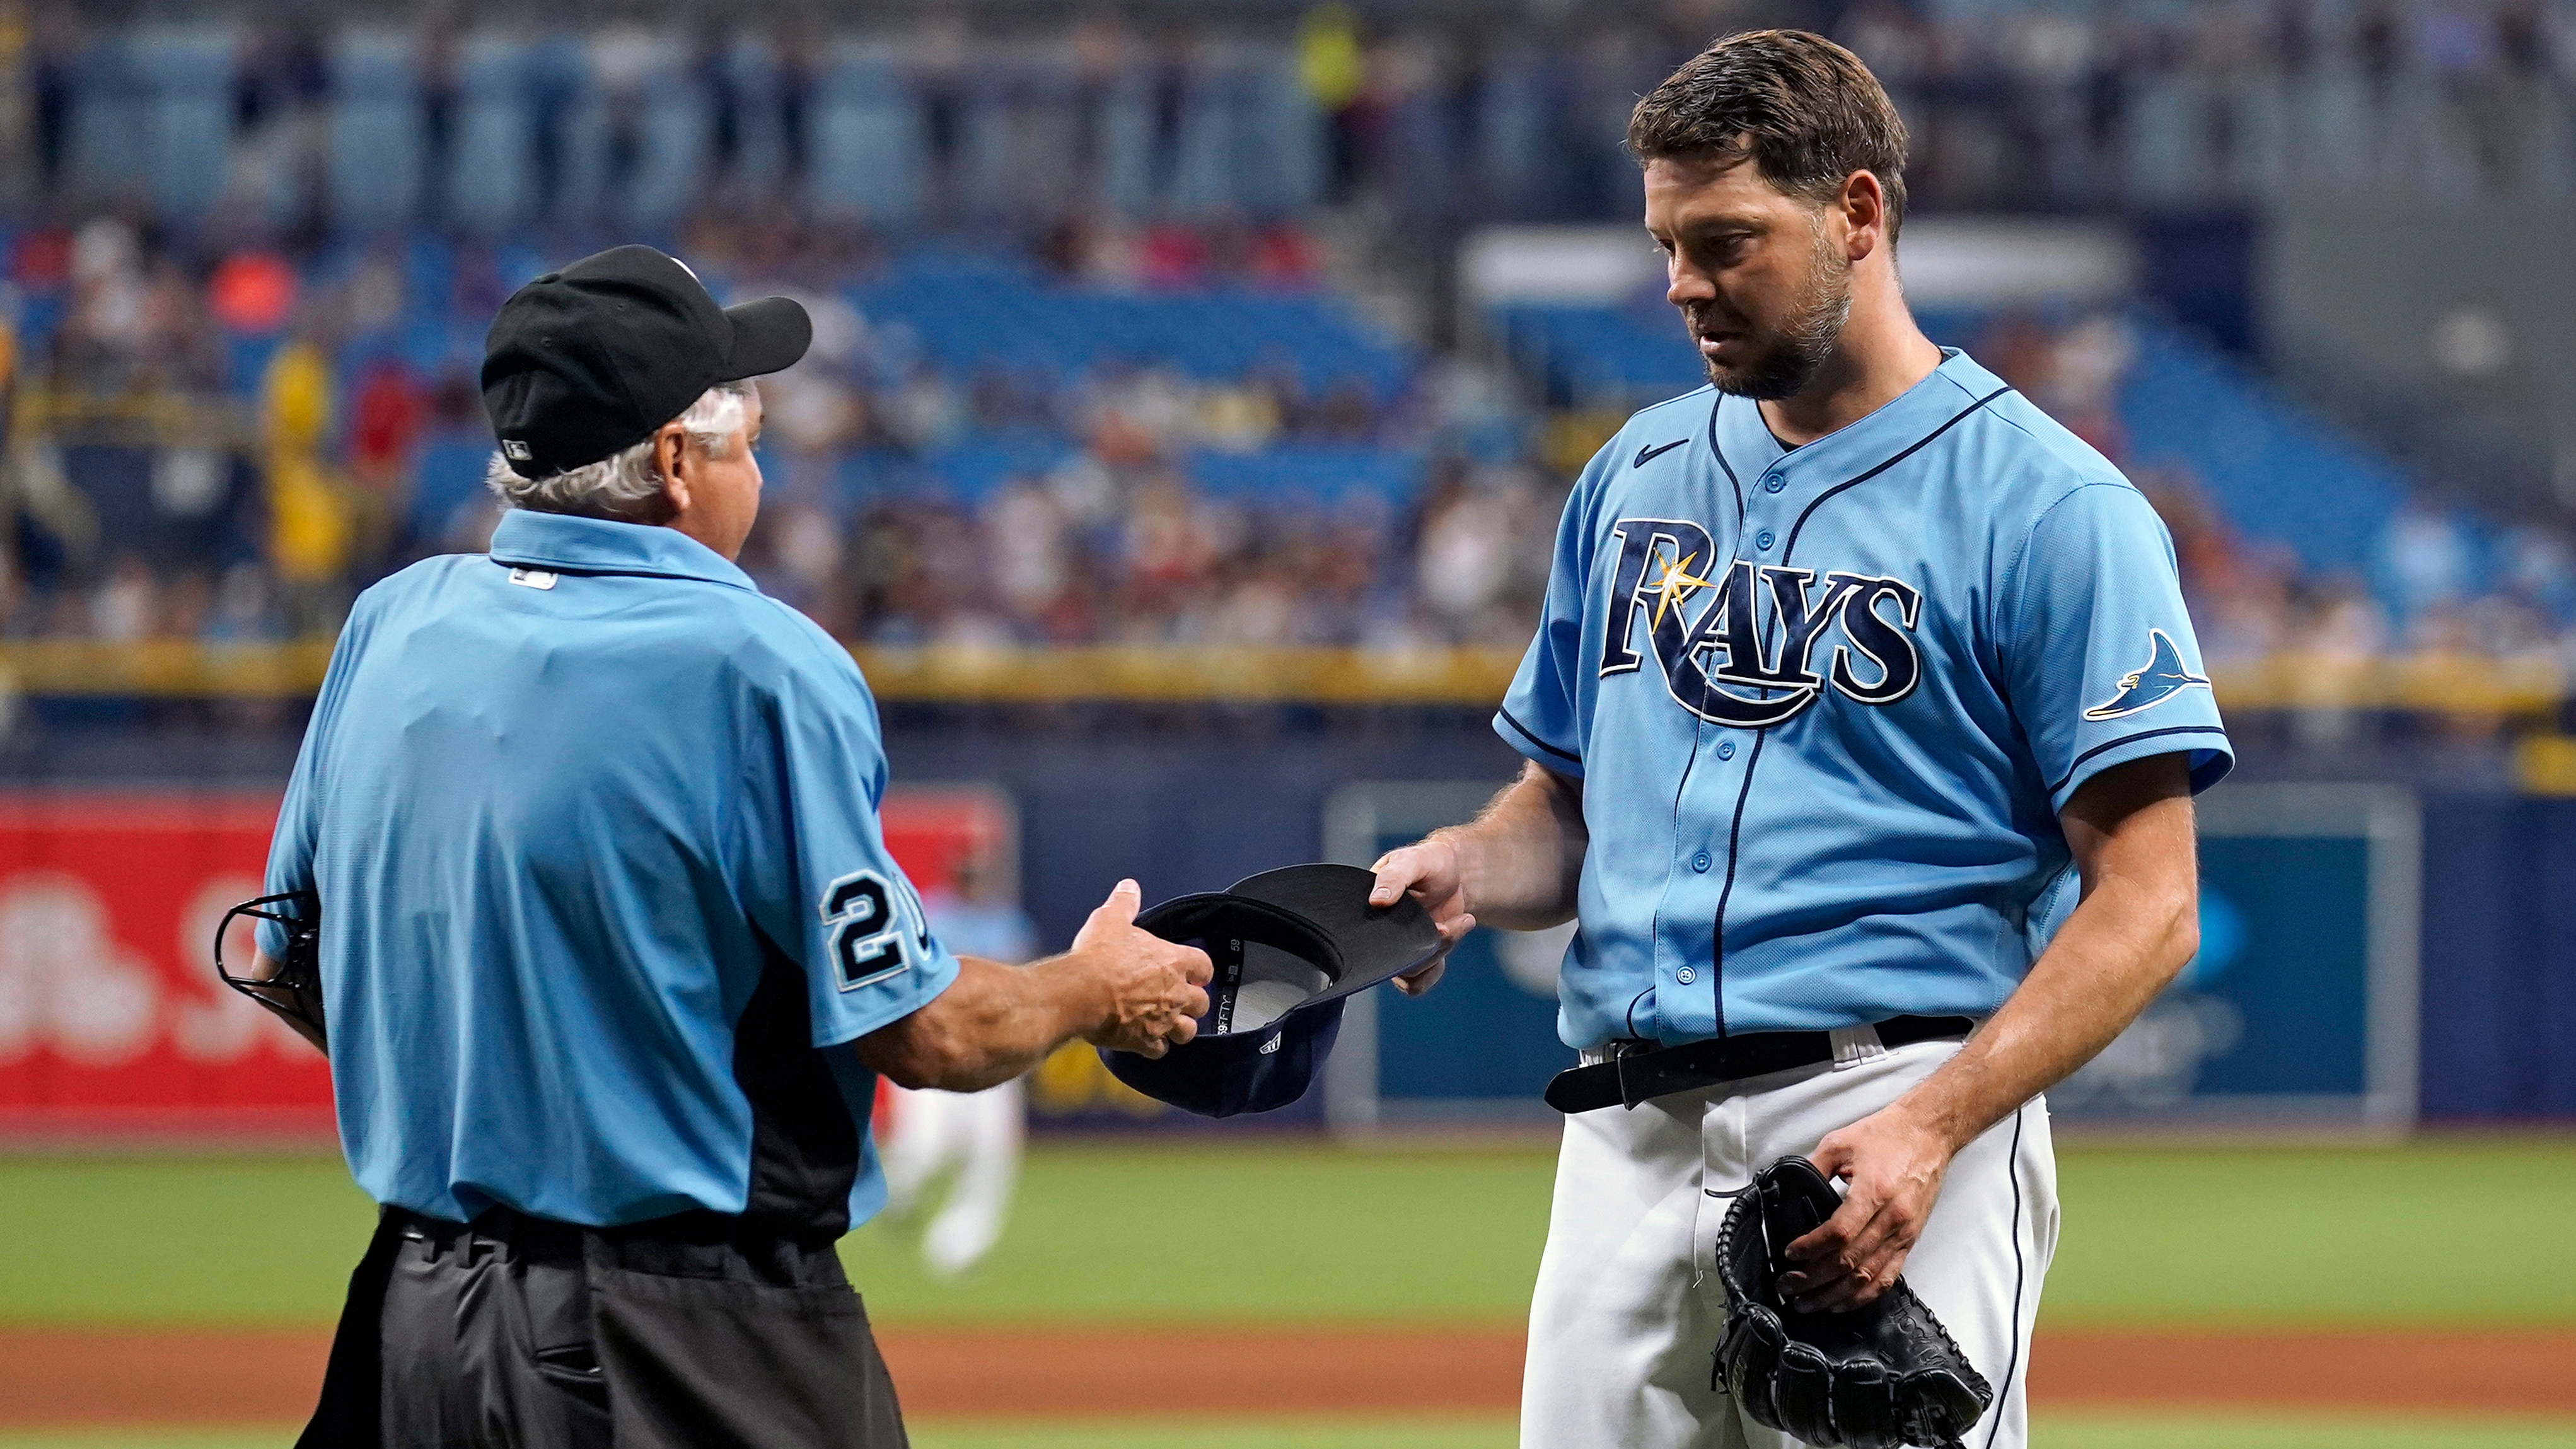 Rays' Rich Hill: 'We don't want to turn baseball into Jerry Springer